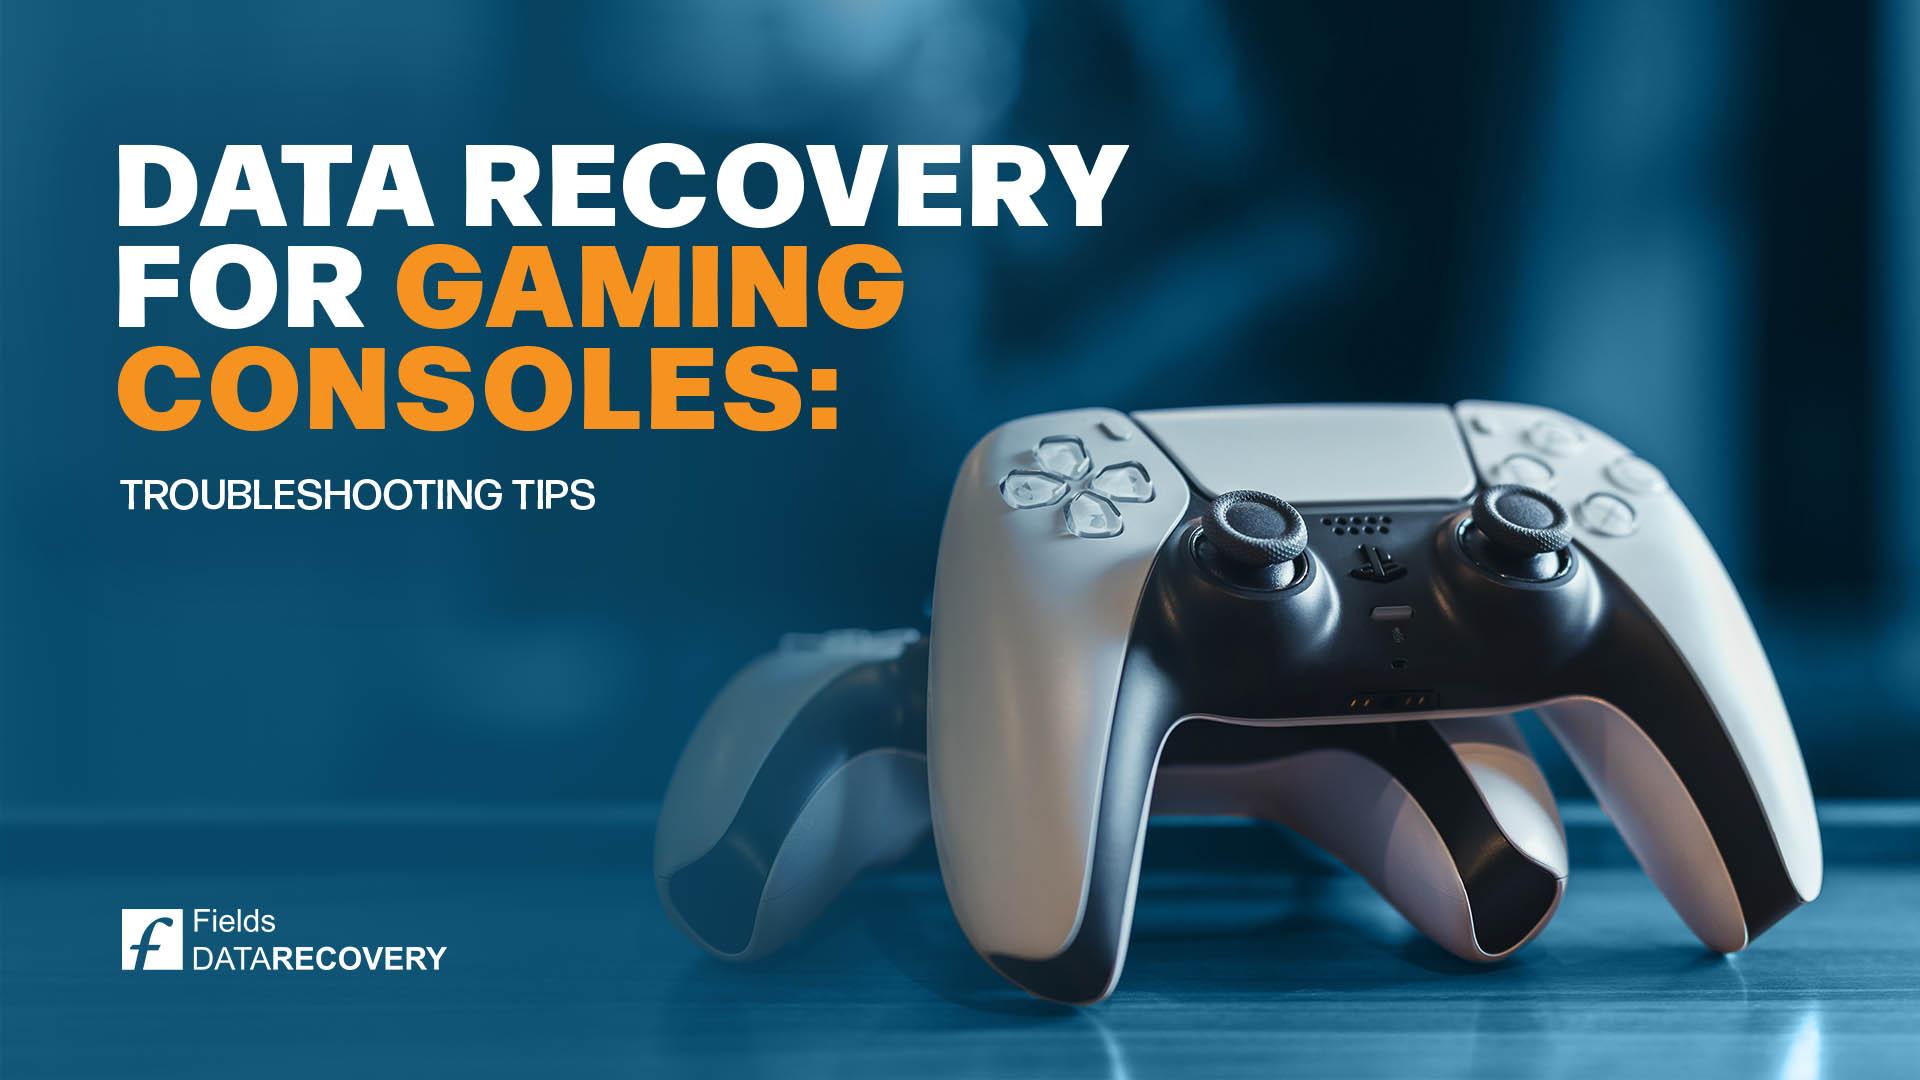 Data Recovery for Gaming Consoles: Troubleshooting Tips